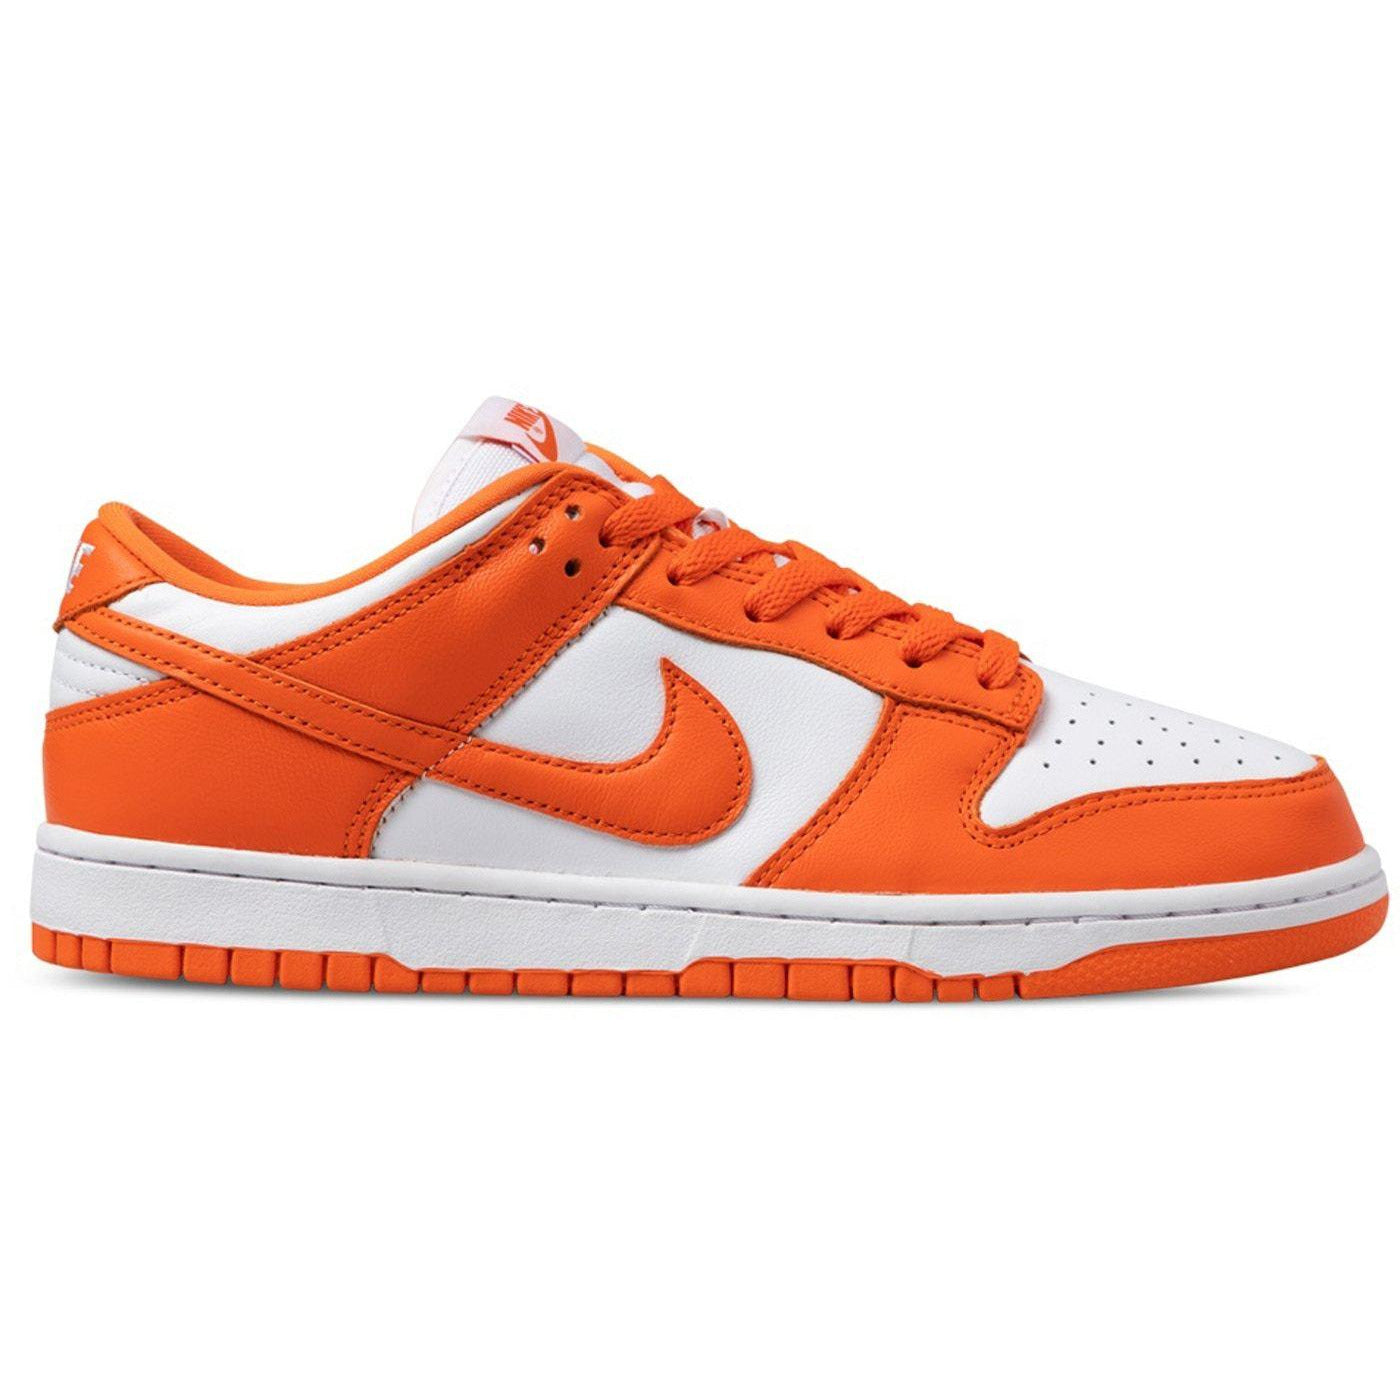 NIKE Dunk Low SP "Syracuse" - THE GAME